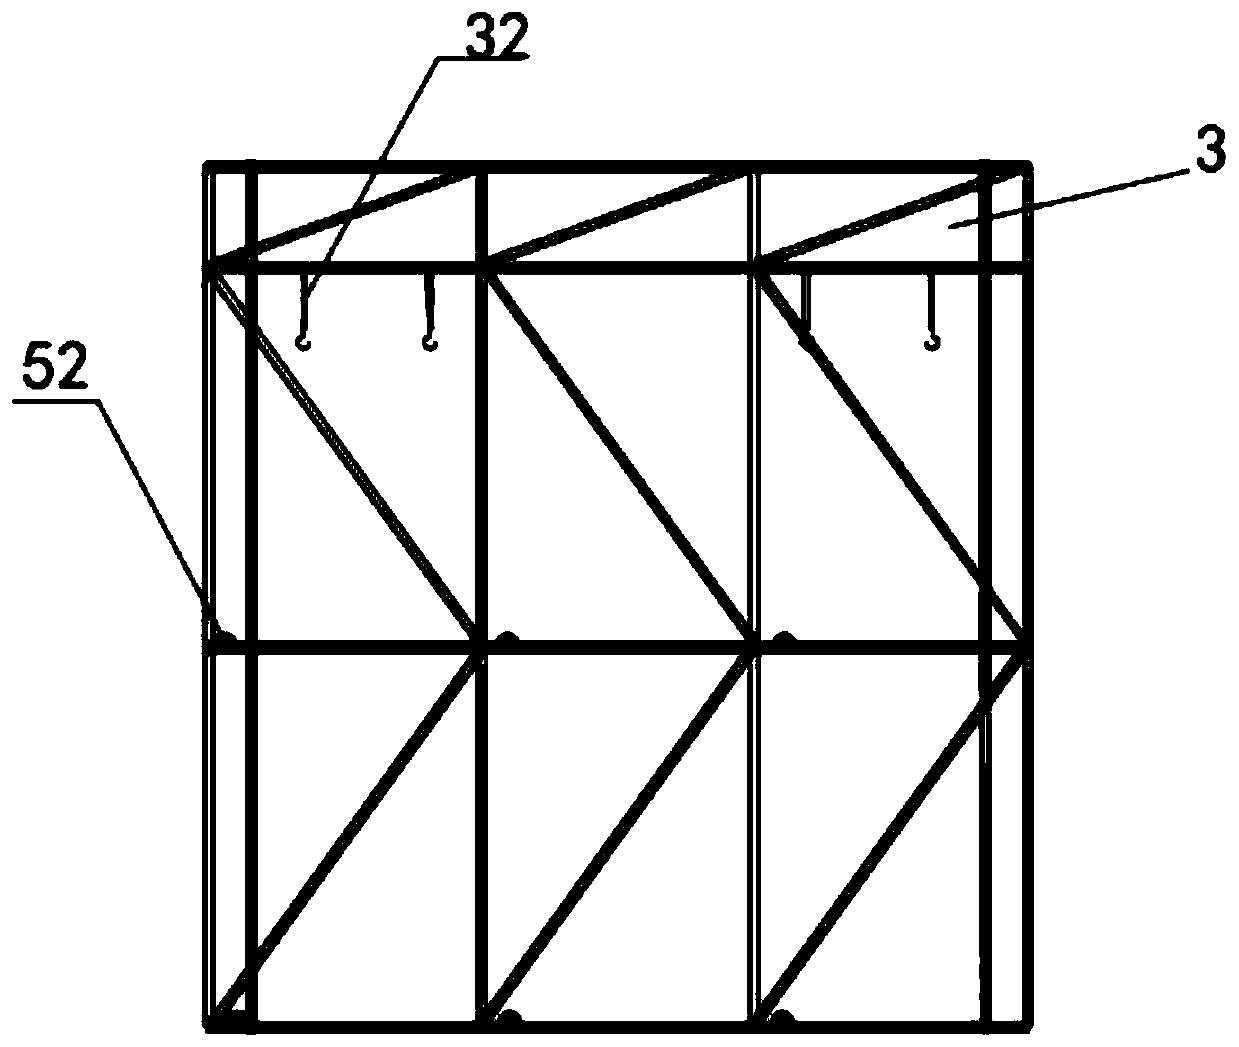 Hanger-integrated stiff skeleton integrated device and reinforcement cage lifting construction method